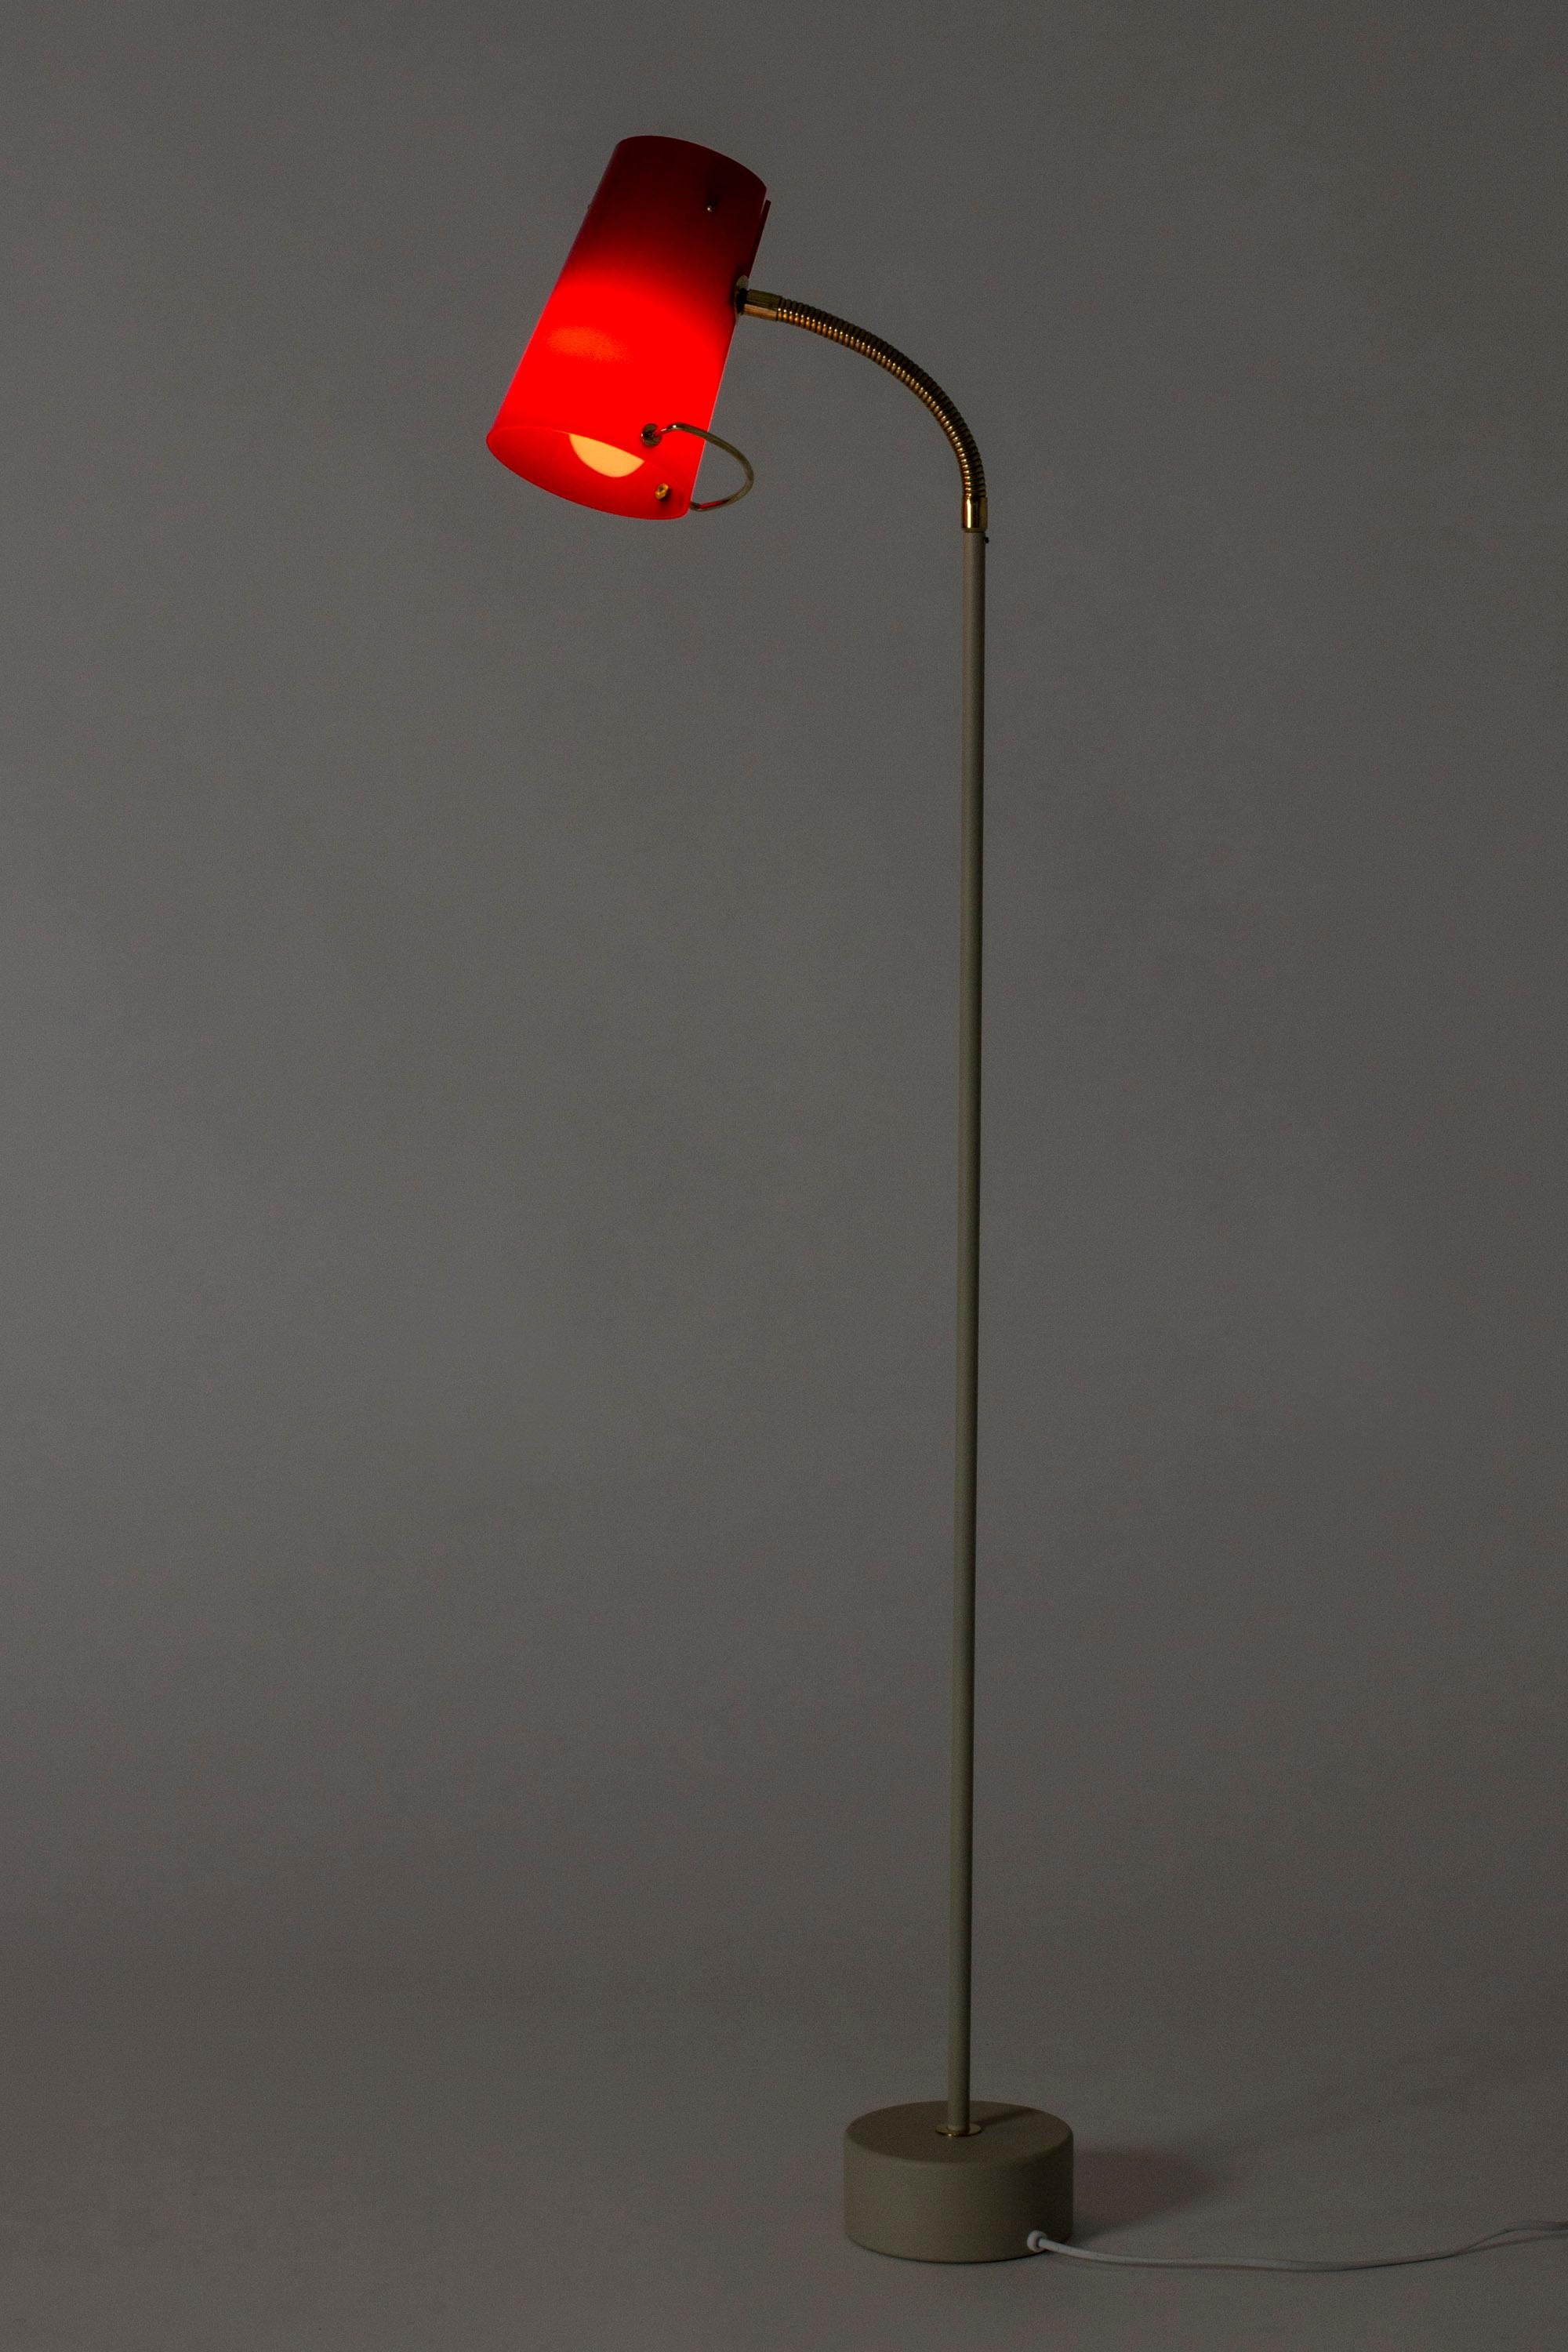 Sleek floor lamp by Hans-Agne Jakobsson, made from light grey lacquered metal. Cherry red shade with brass details, flexible brass neck. Very cool combination of materials.